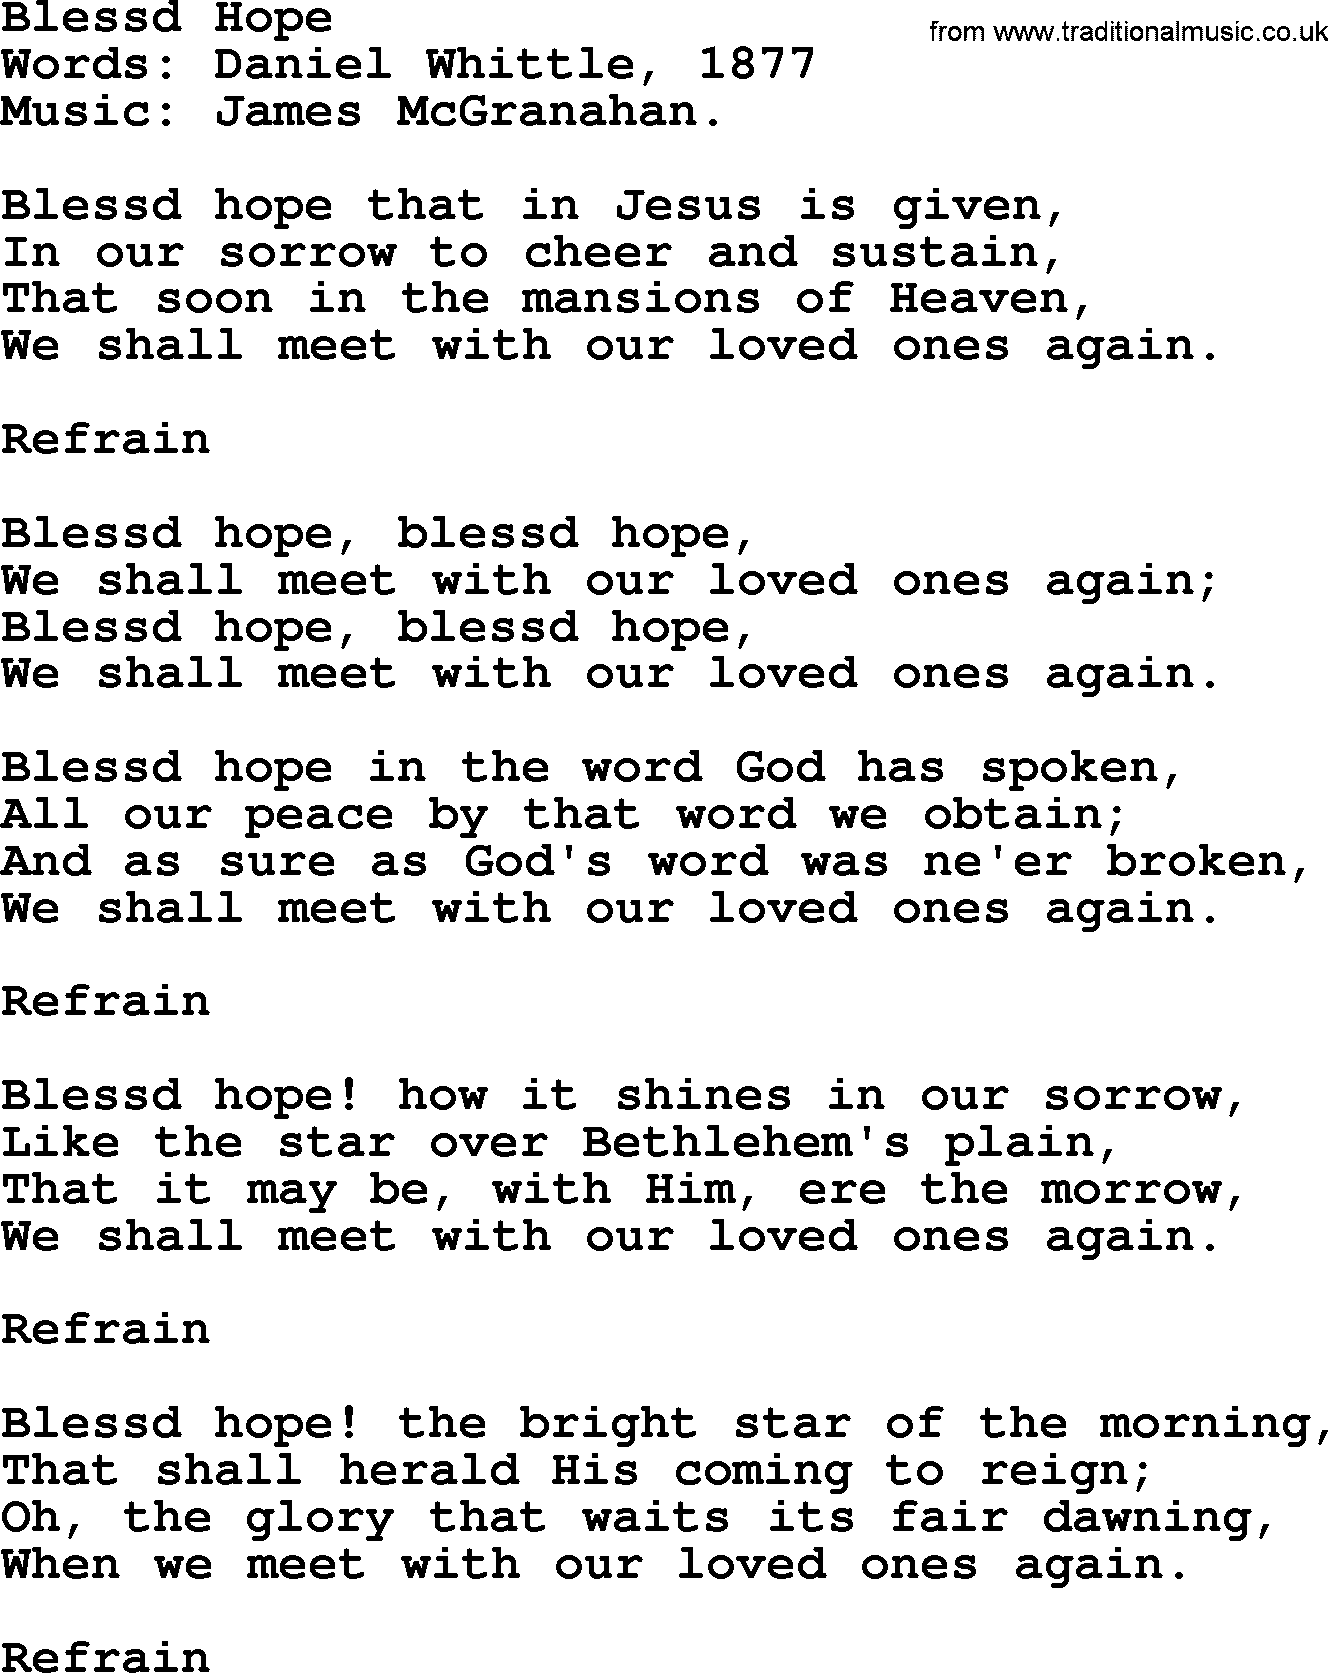 Songs and Hymns about Heaven: Blessed Hope lyrics with PDF